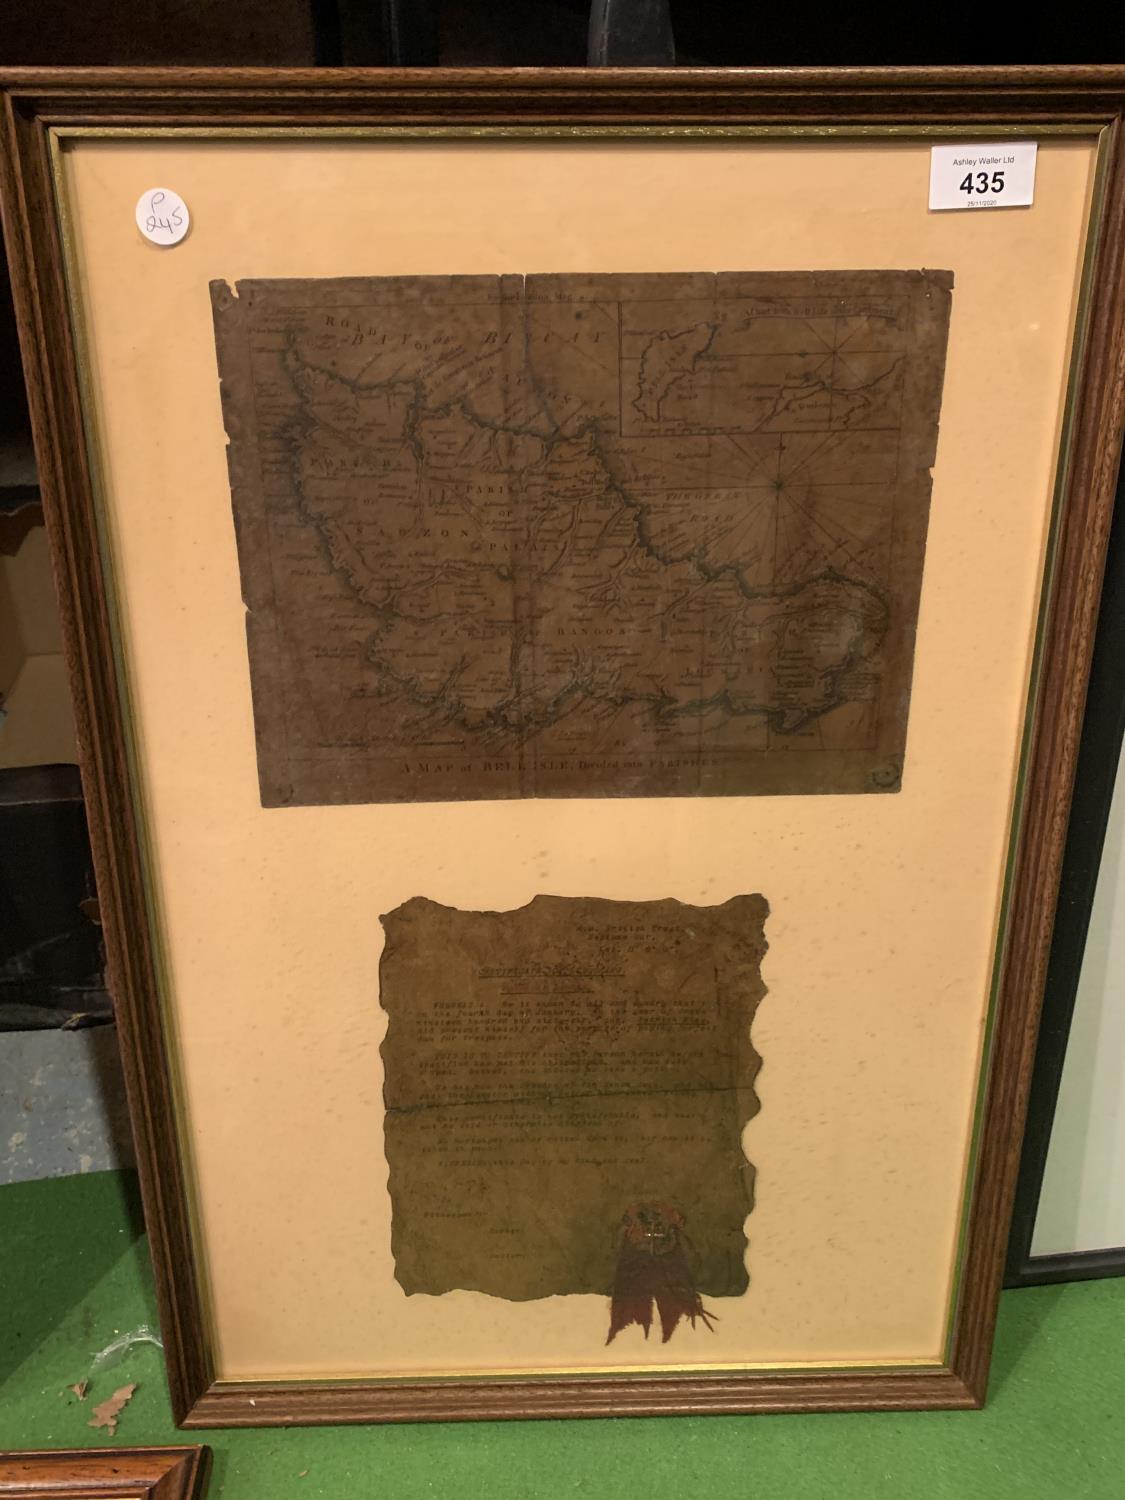 A FRAMED MAP OF BELL ISLE AND A CERTIFICATE OF CROSSING